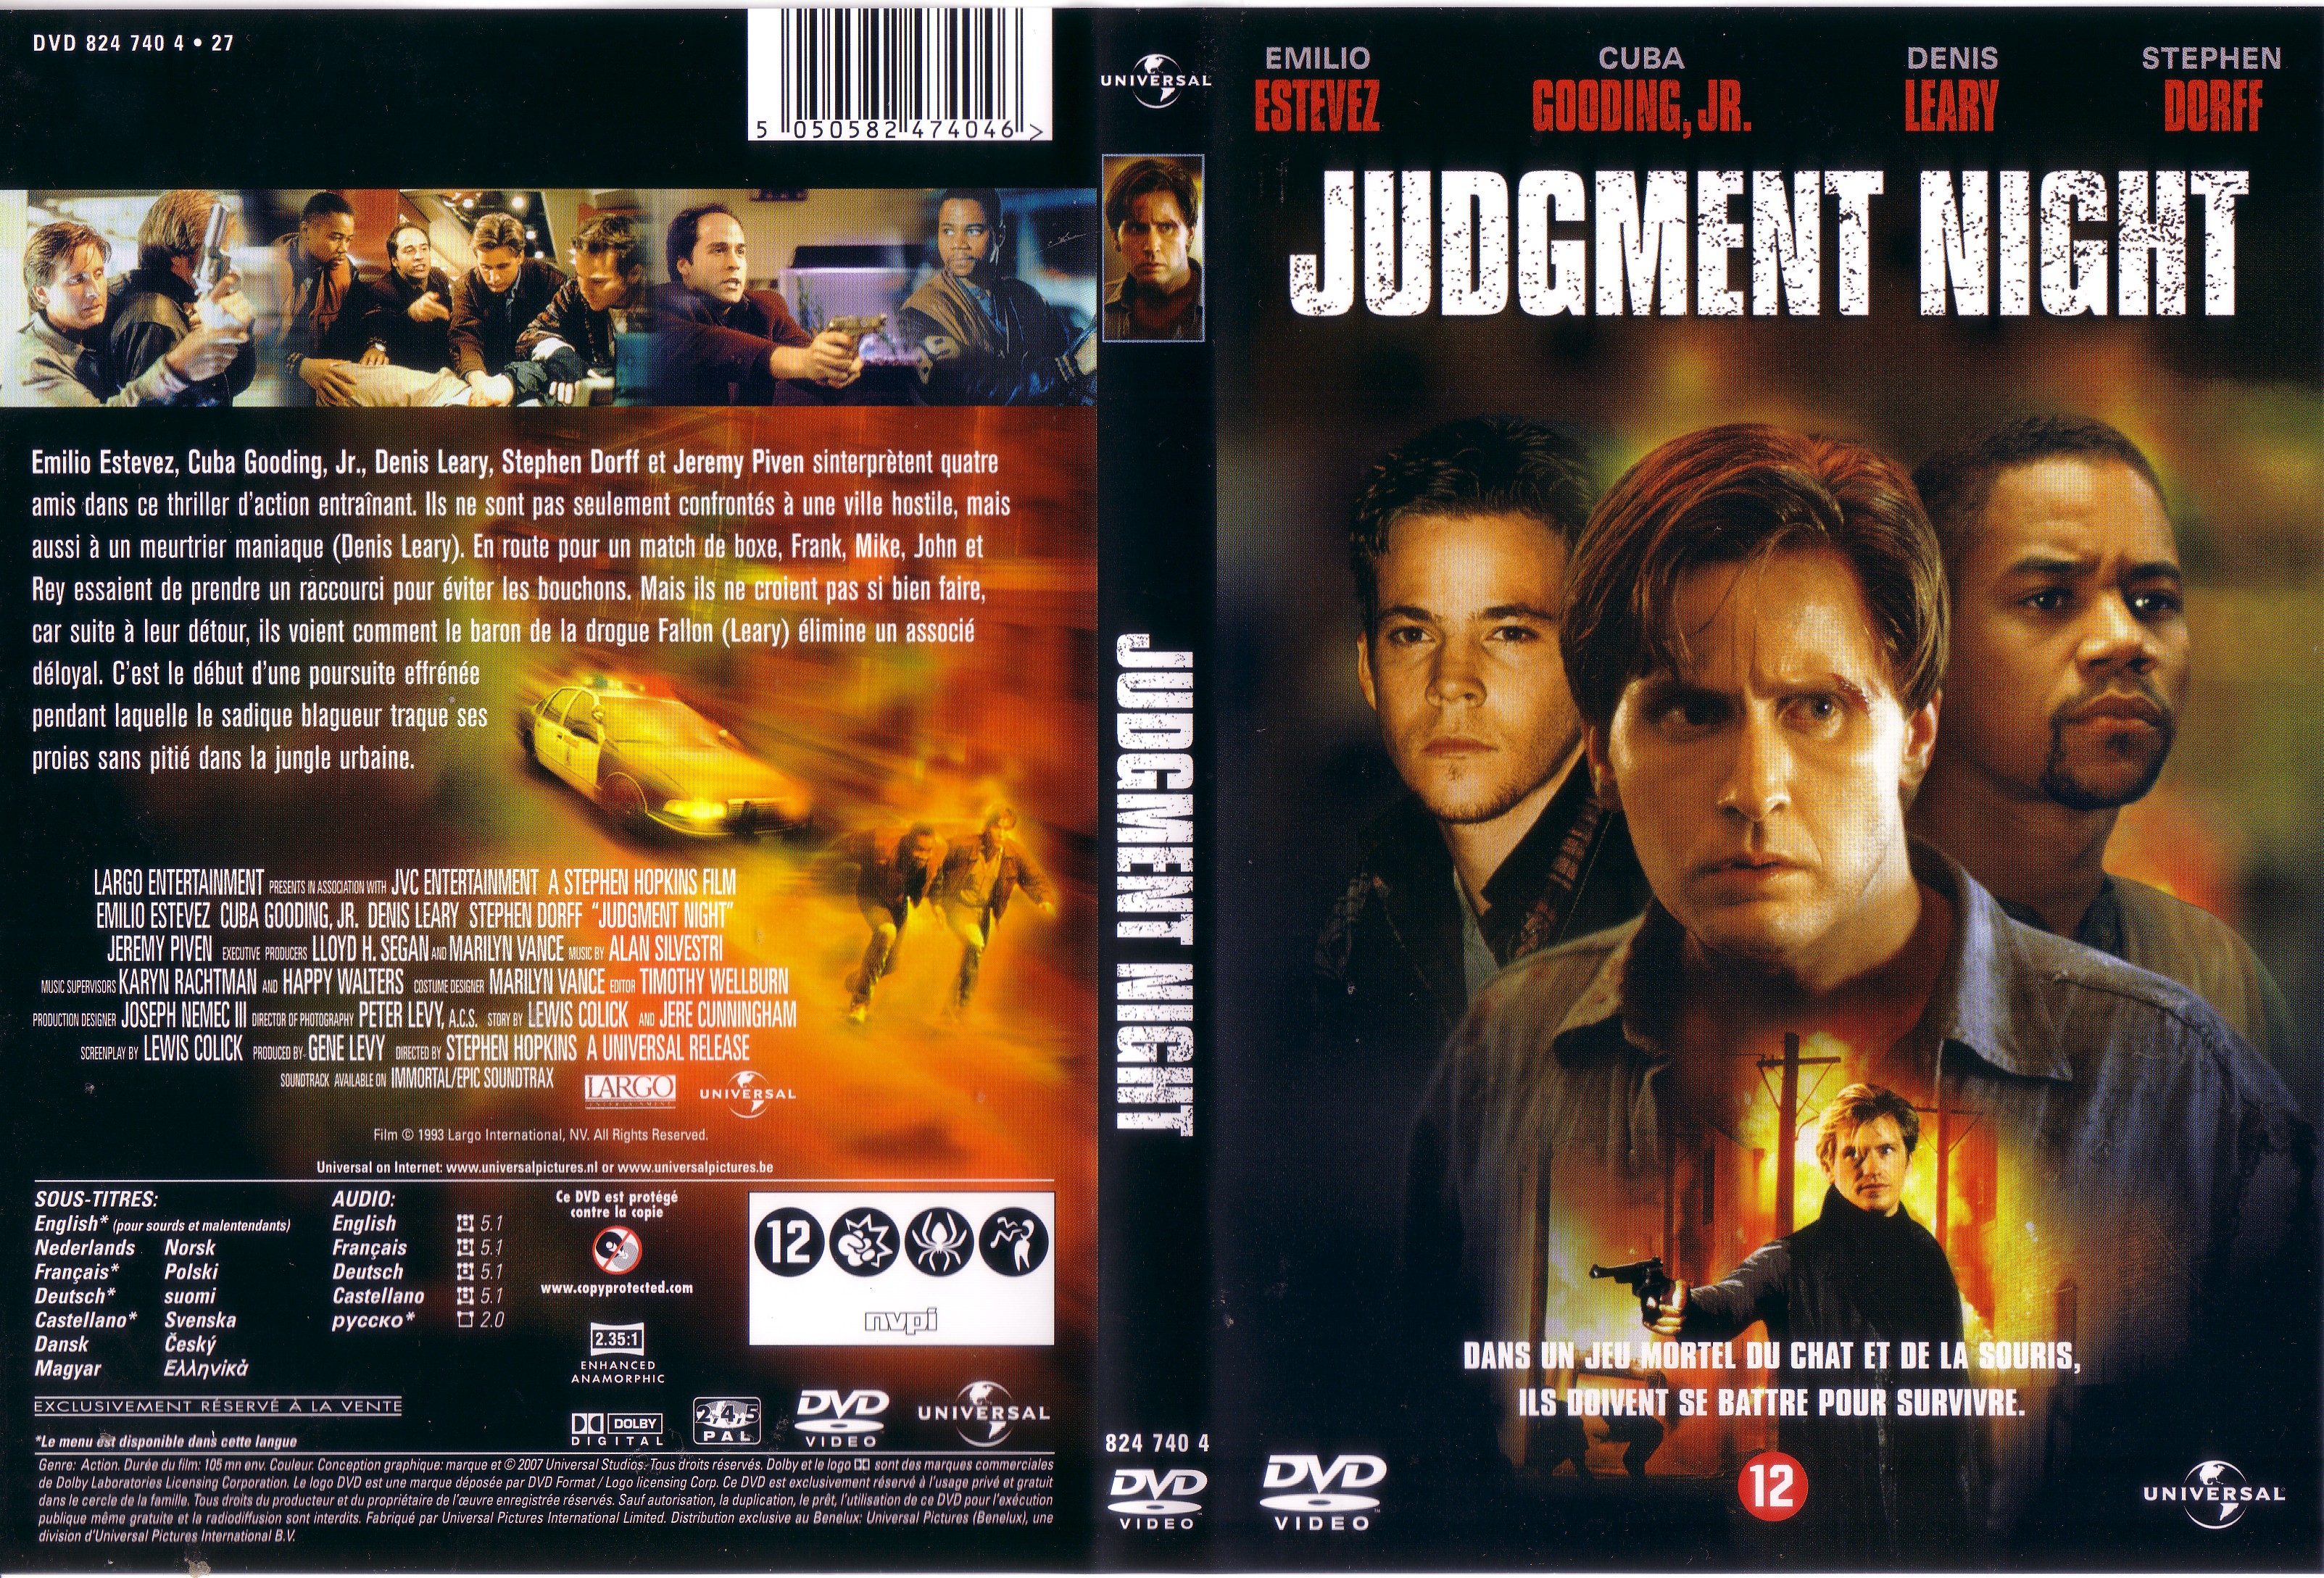 Jaquette DVD Judgment night